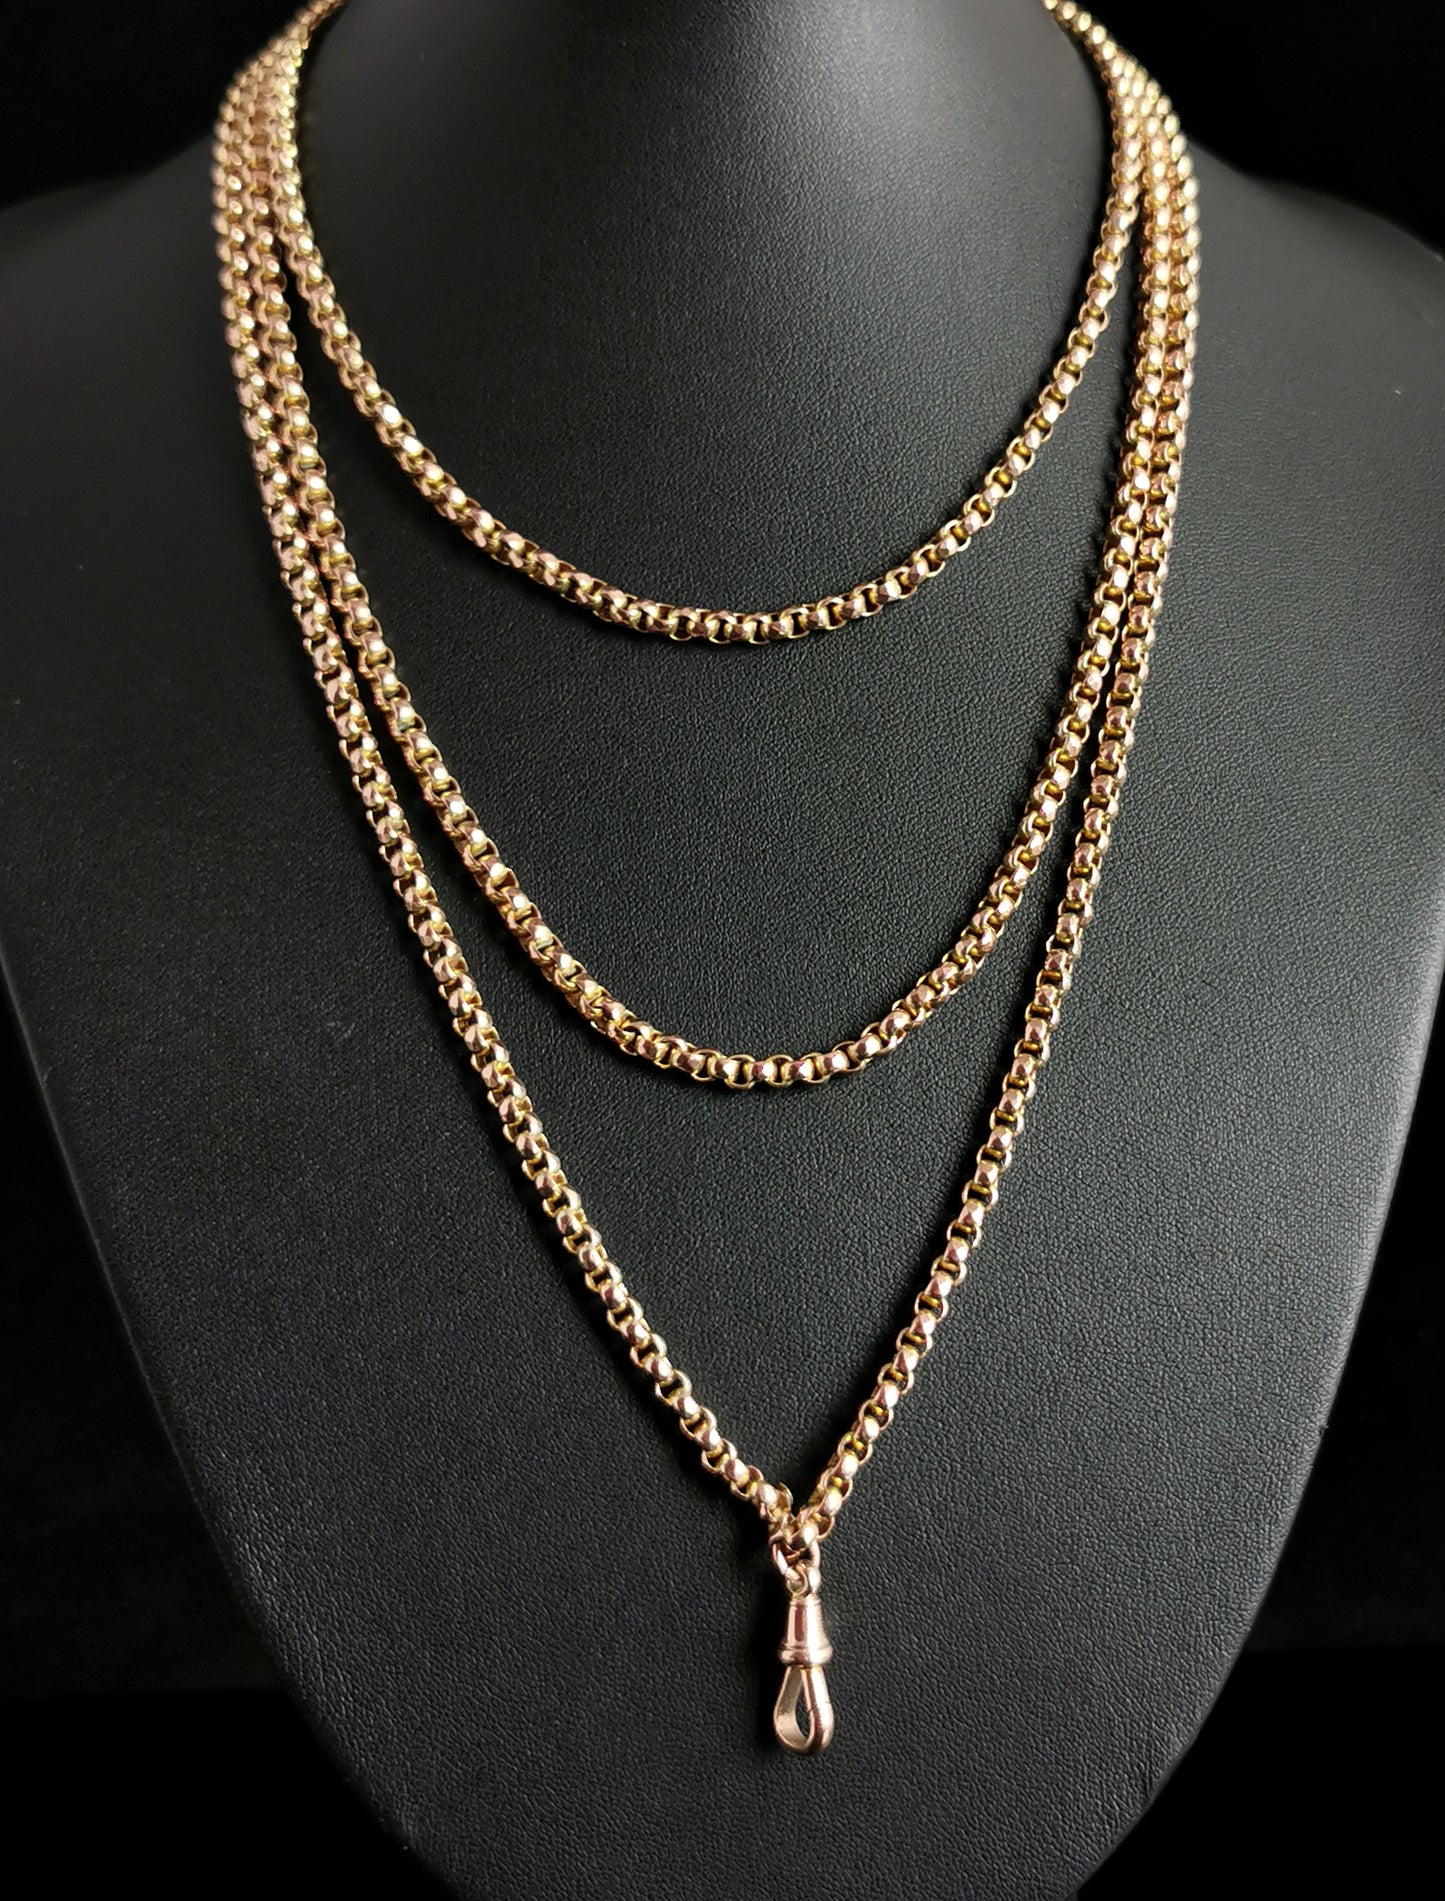 Antique 9ct gold long chain, longuard l, muff chain necklace, Victorian